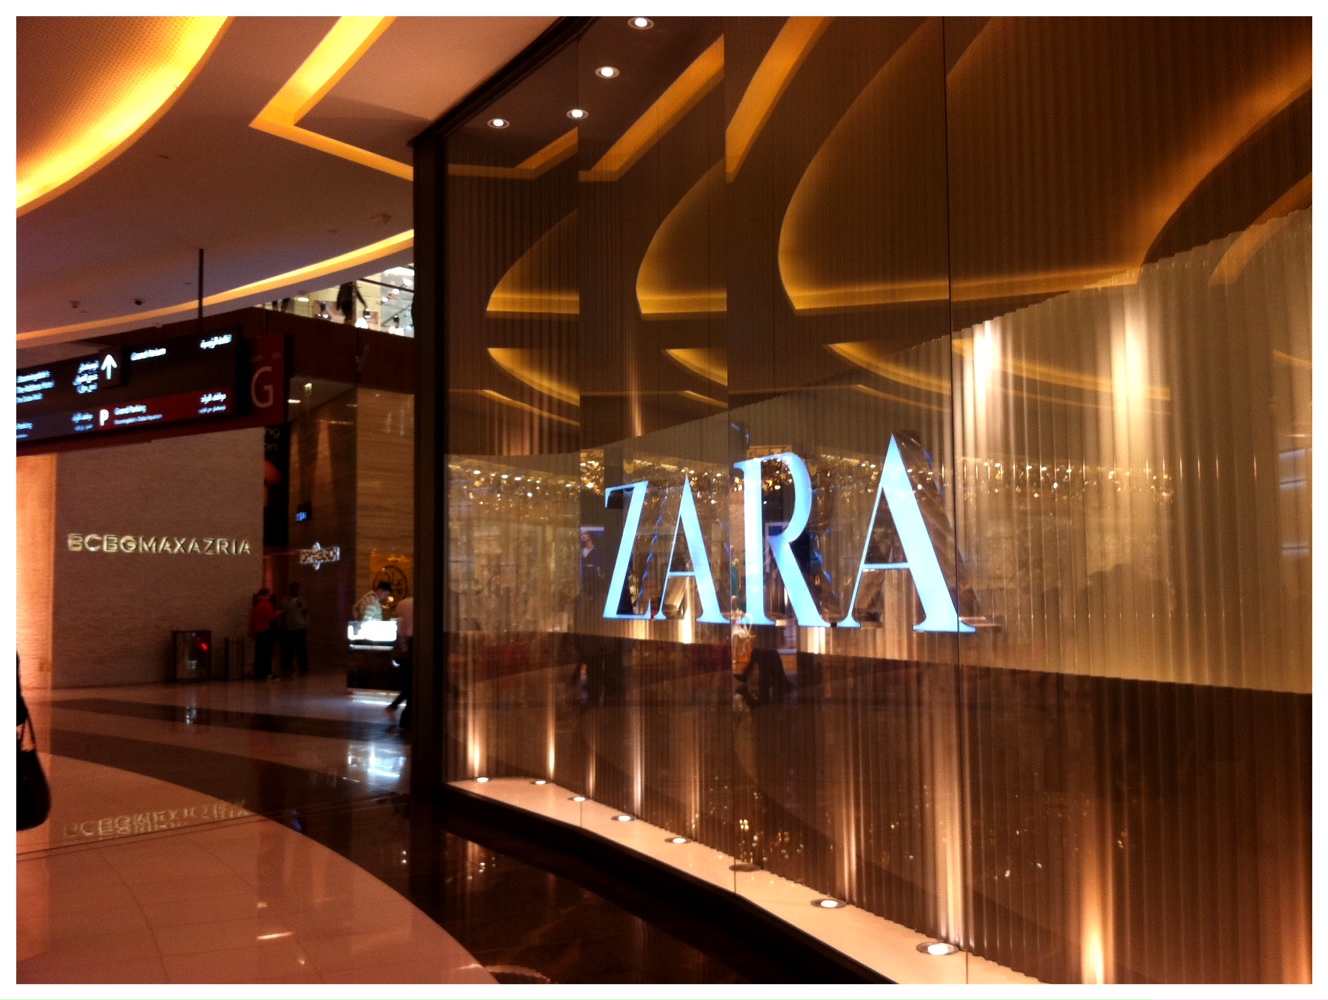 Dubaiâ€¦more than one thousand and one shop : ) | Shopping Around the ...